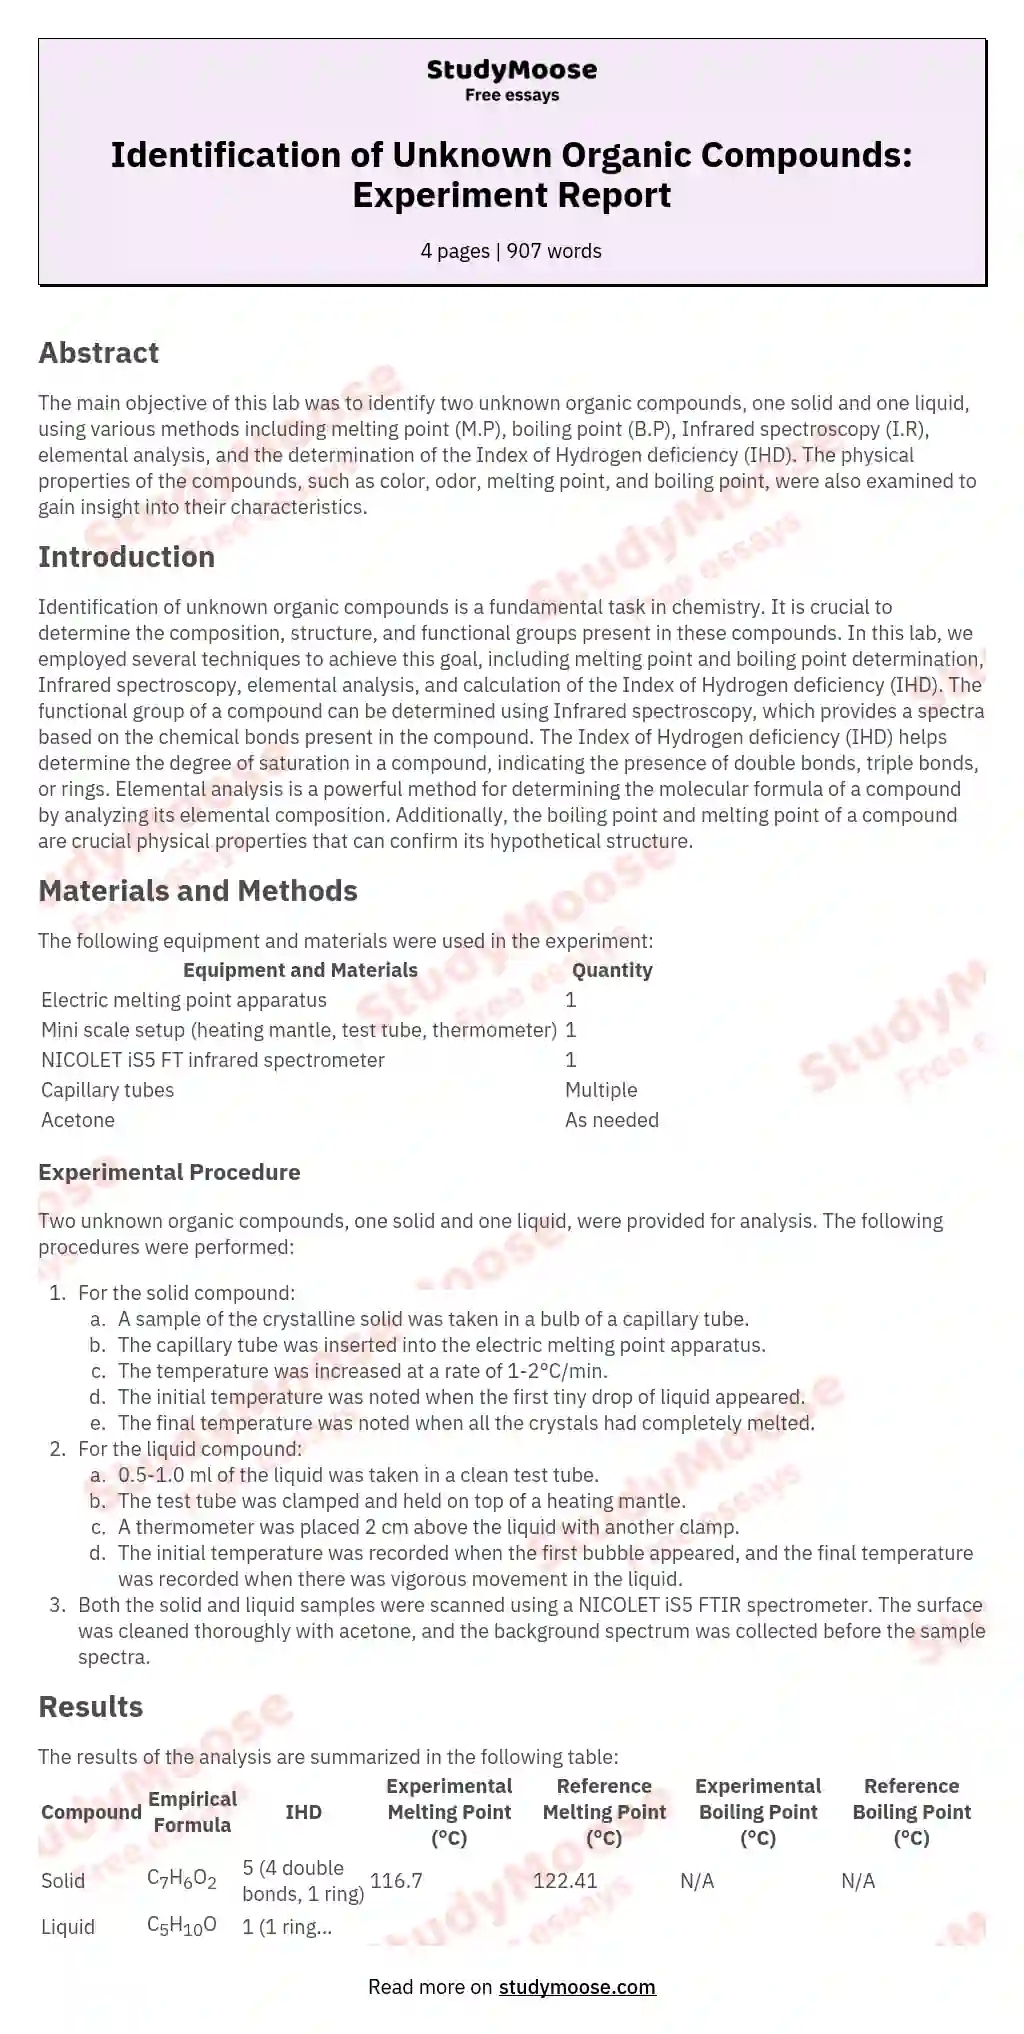 Identification of Unknown Organic Compounds: Experiment Report essay